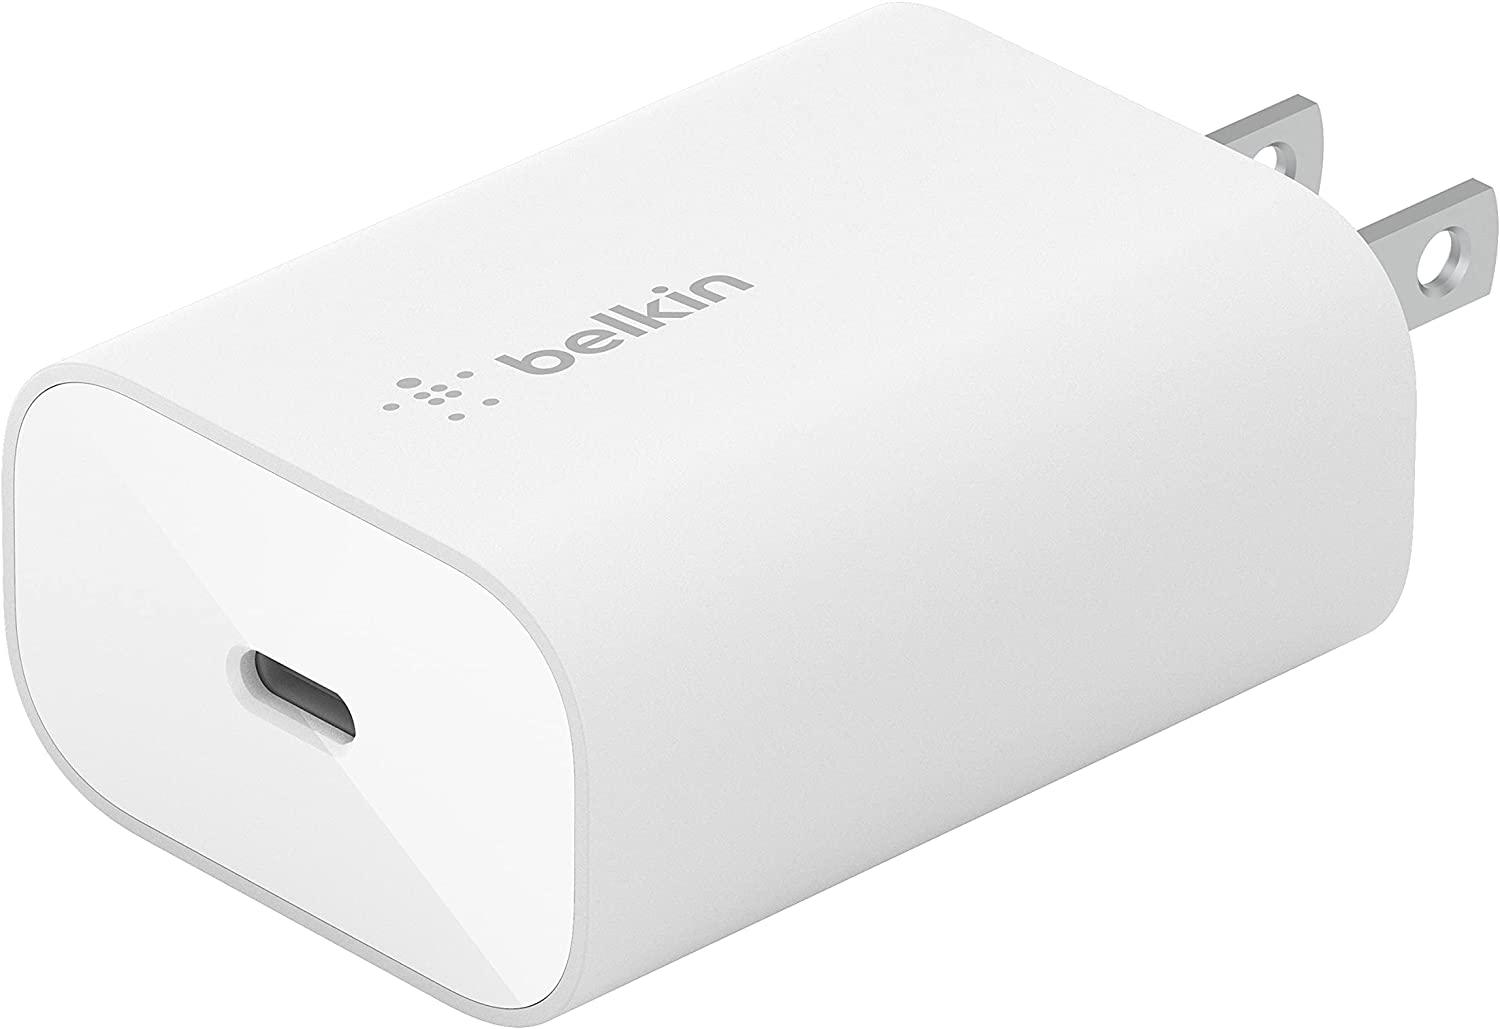 Belkin 25W USB-C Wall Charger for $9.99